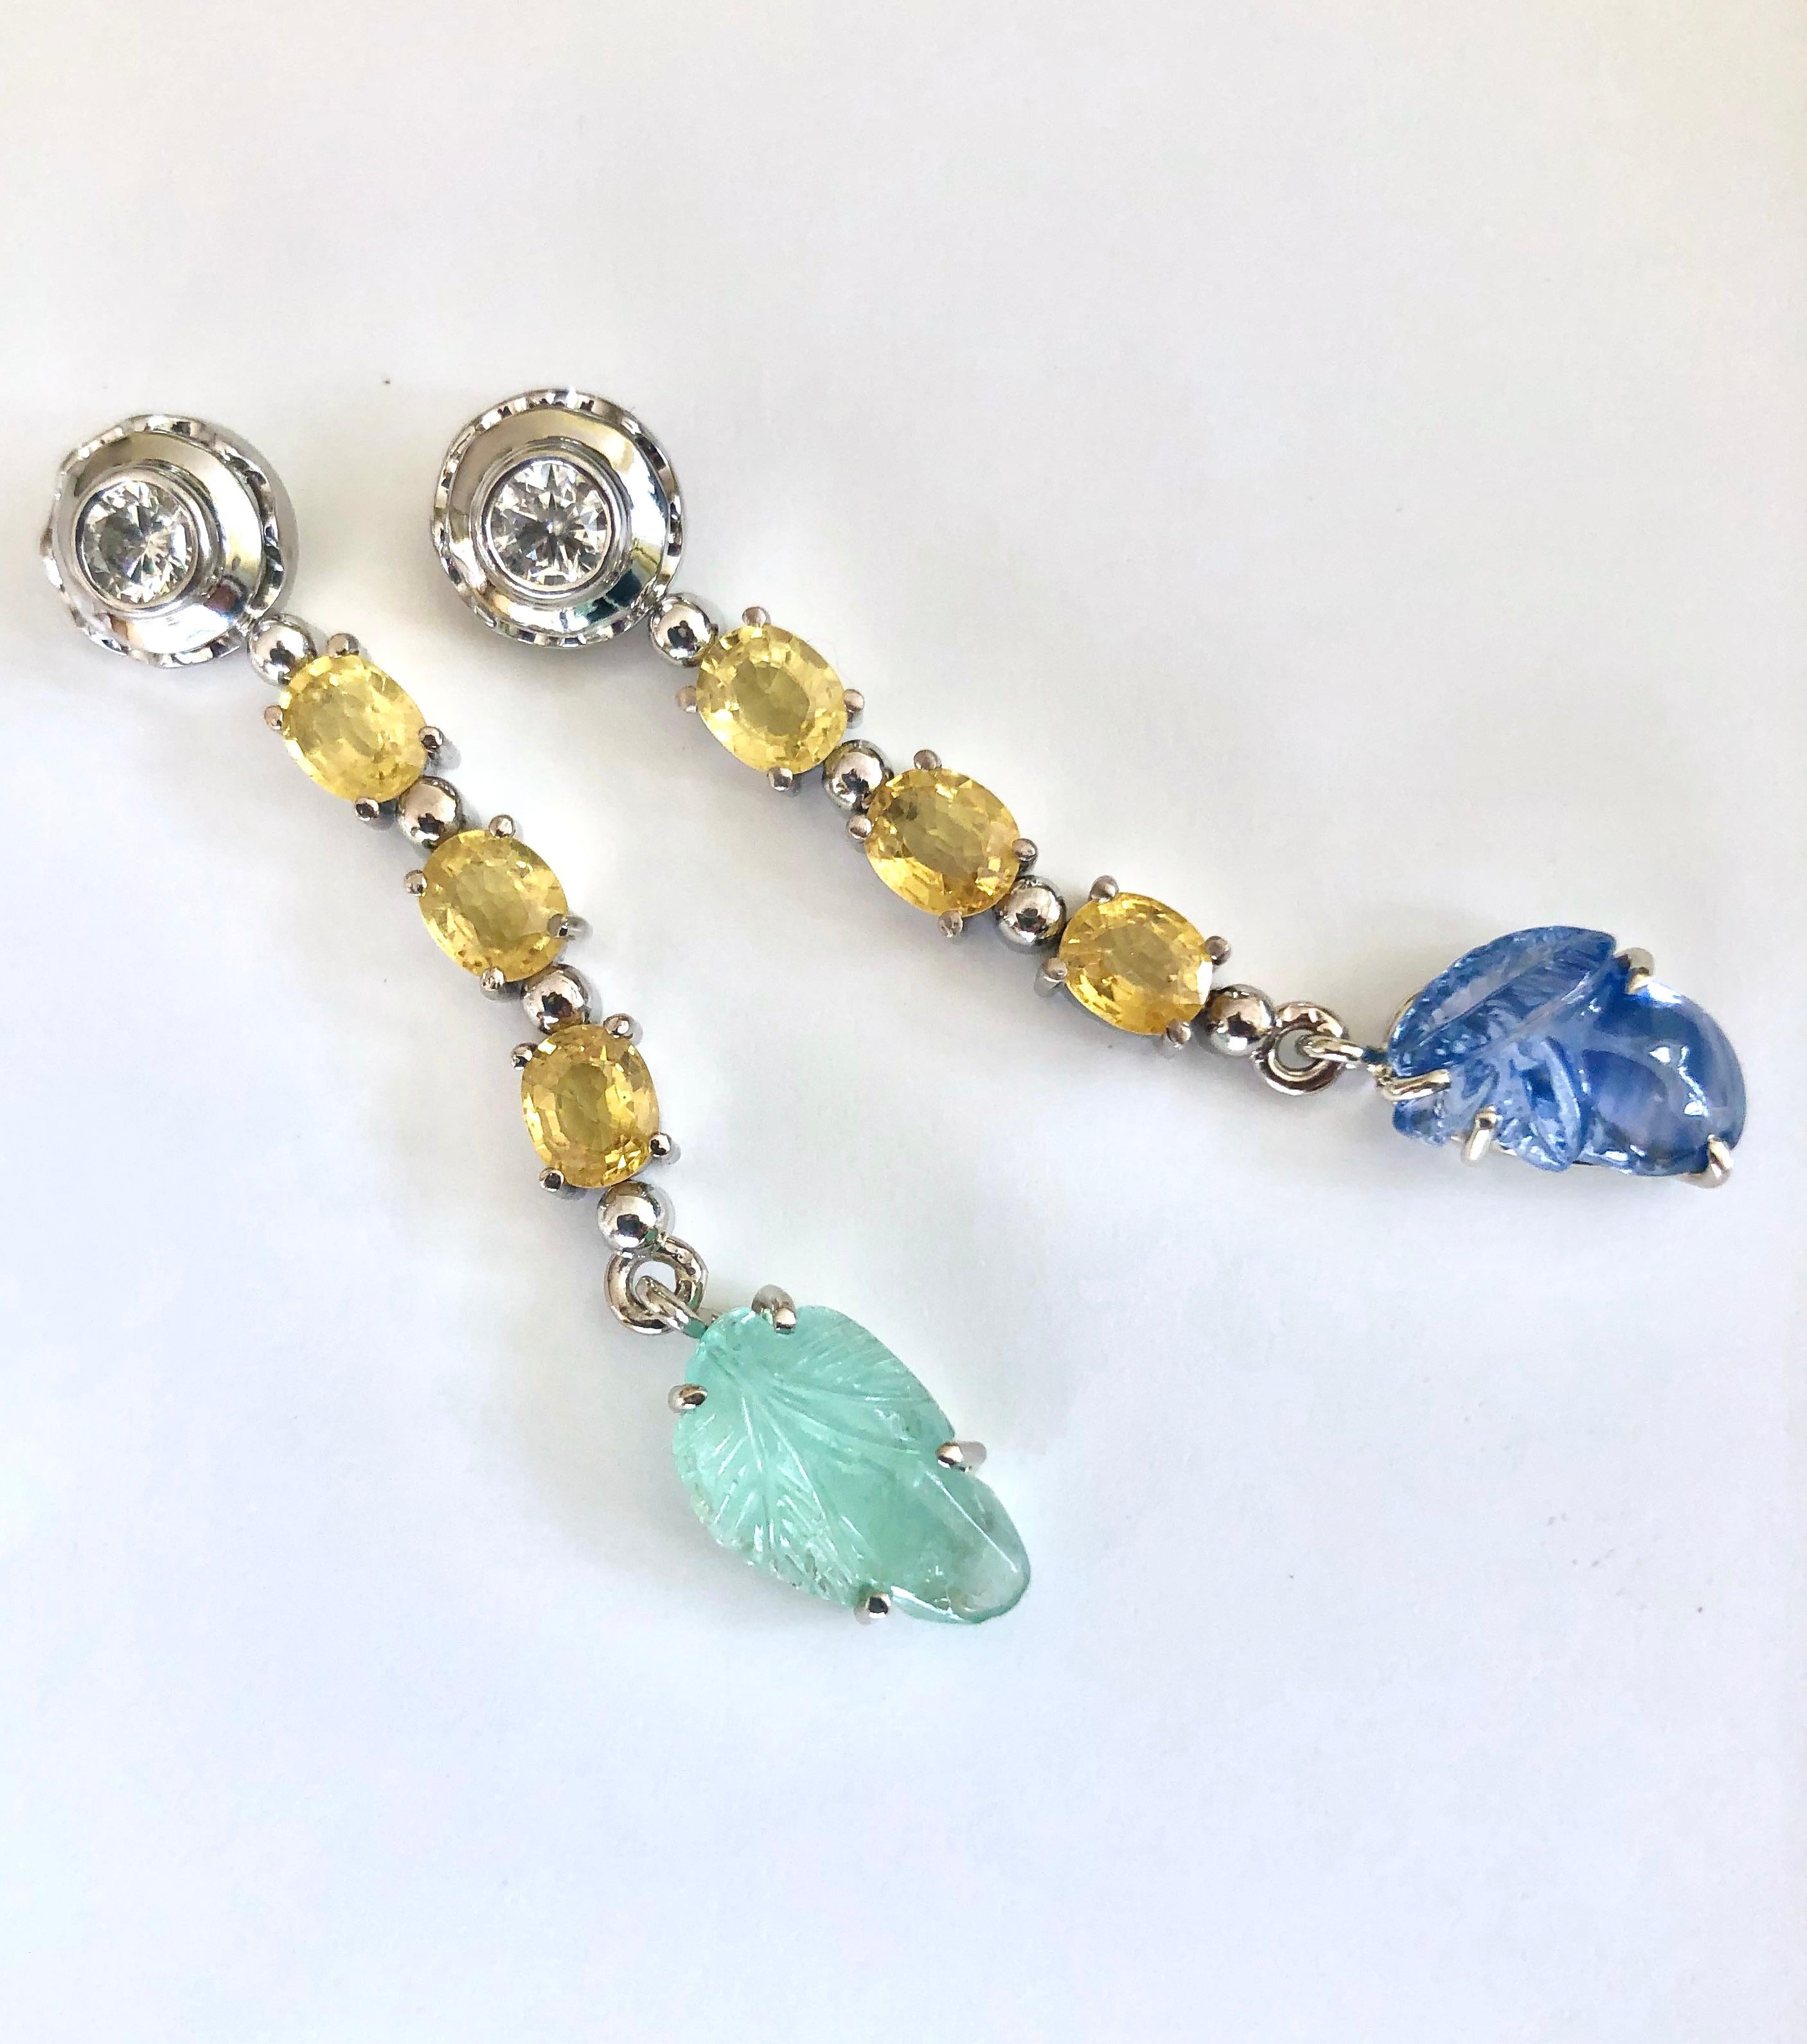 A stunning pair with beautiful quality sapphires, and diamond emerald drop dangle earrings! 
The earrings have a total weight of 9.10 carats of carved sapphire and emerald leaf motifs that hang beautifully from three oval yellow sapphires. The total